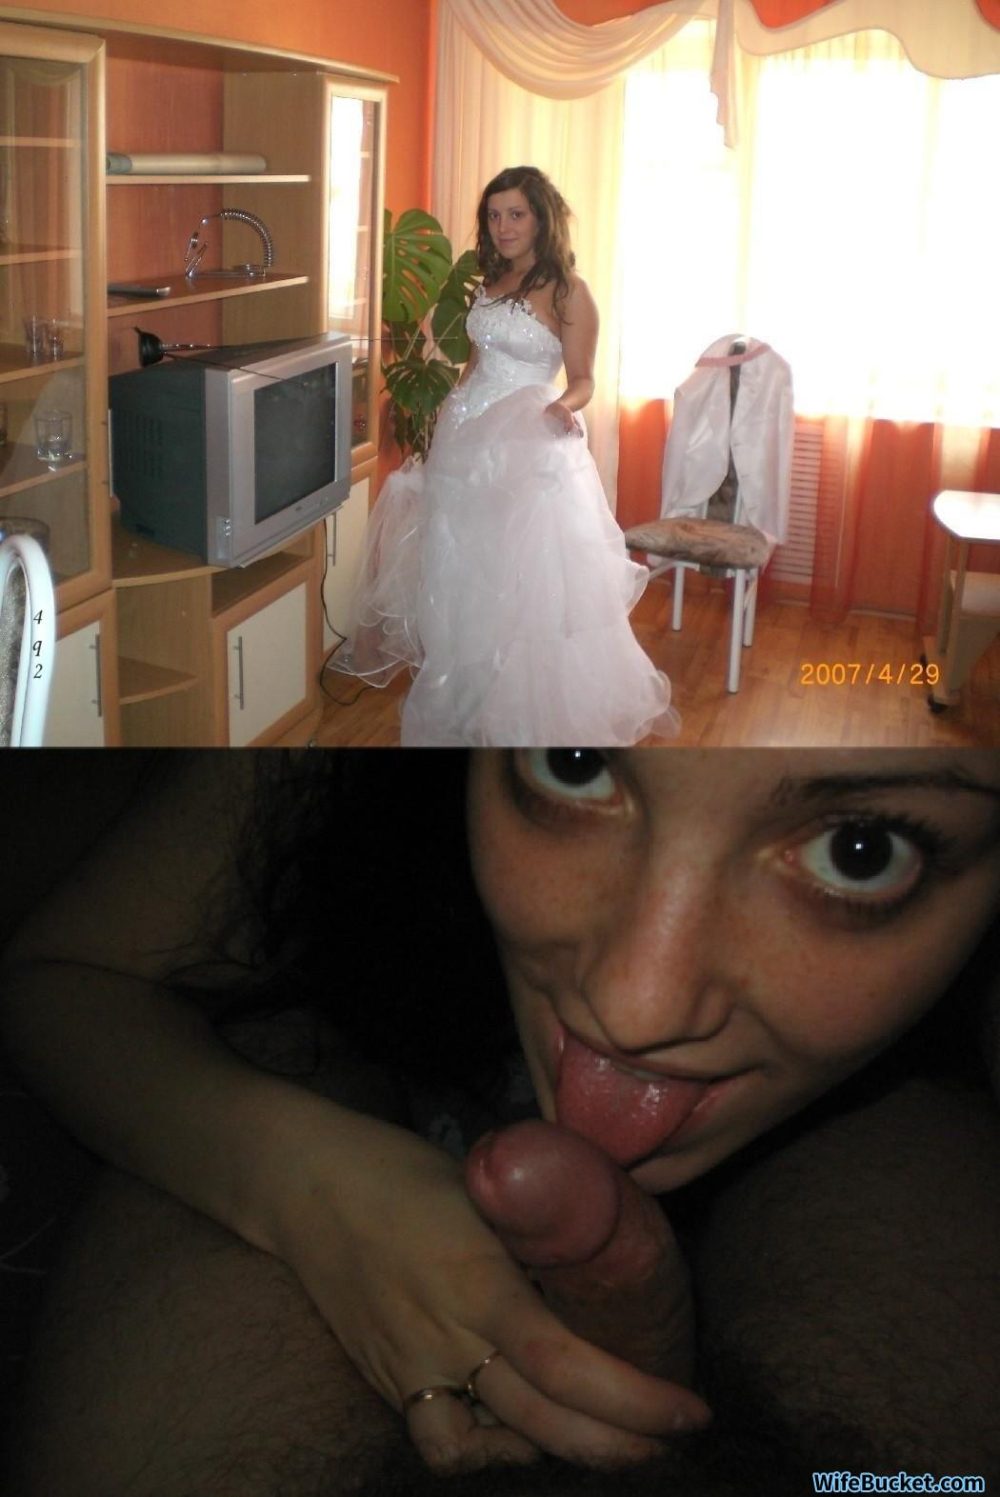 Before-after blowjob from this bride